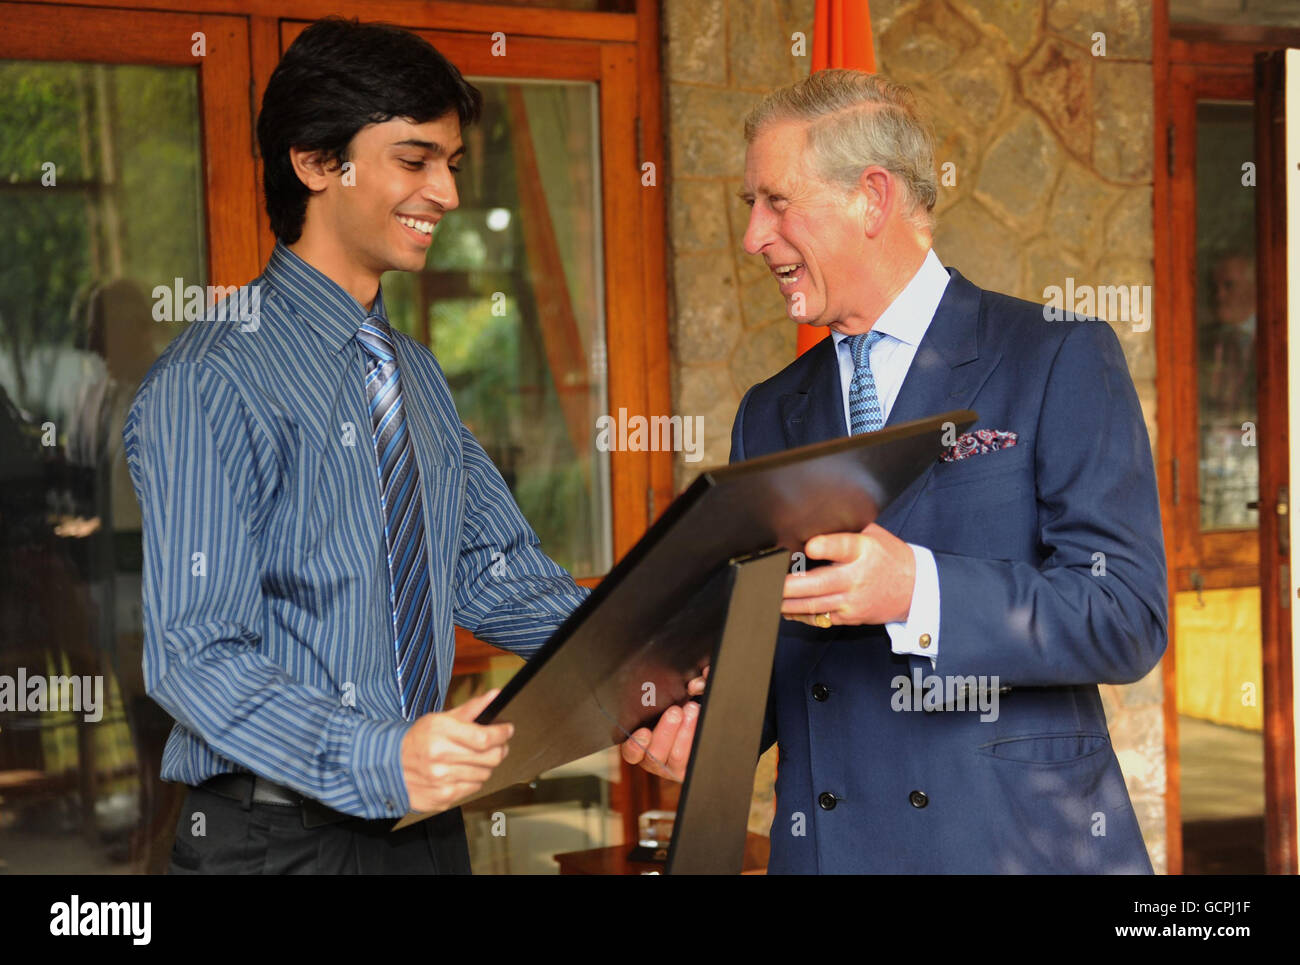 The Prince of Wales meets presents the British High Commission trophy to a student from Jwalamukhi House as he meets students from the Indian Institute of Technology (IIT) to celebrate the institution's golden jubilee at the British High Commission in New Delhi, India during a visit to the country with the Duchess of Cornwall. Stock Photo